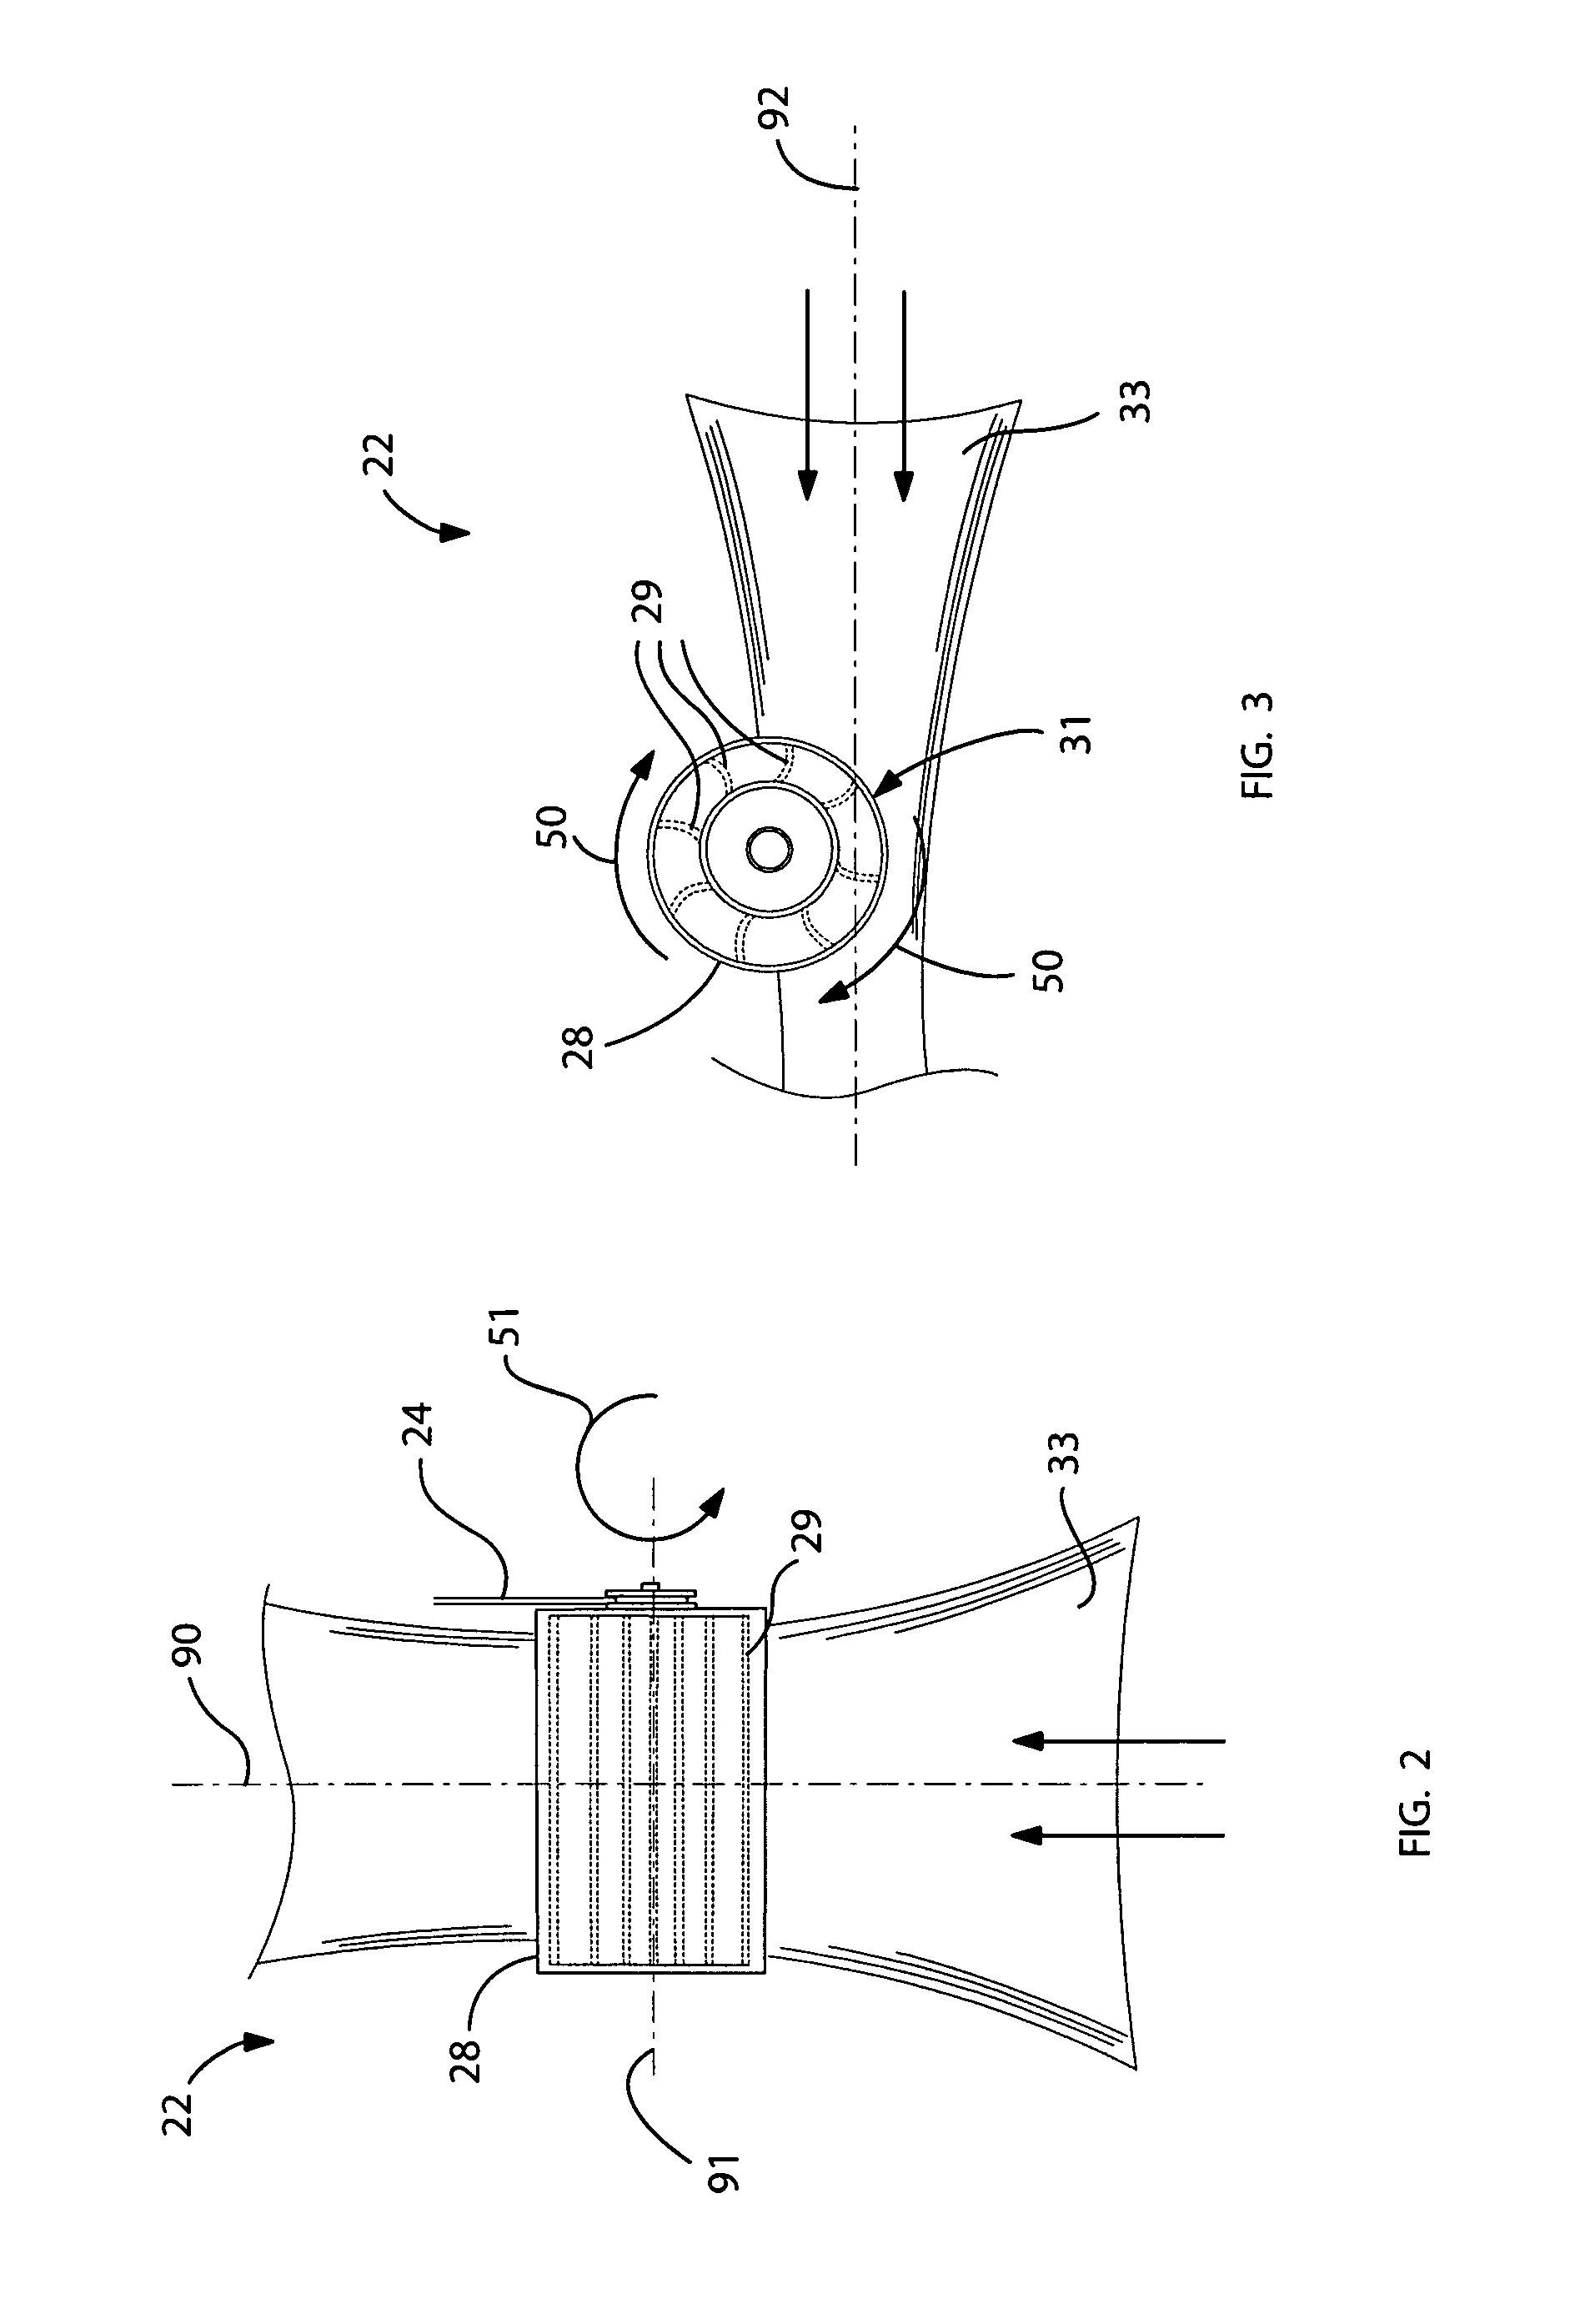 Vehicle battery recharging system and associated method